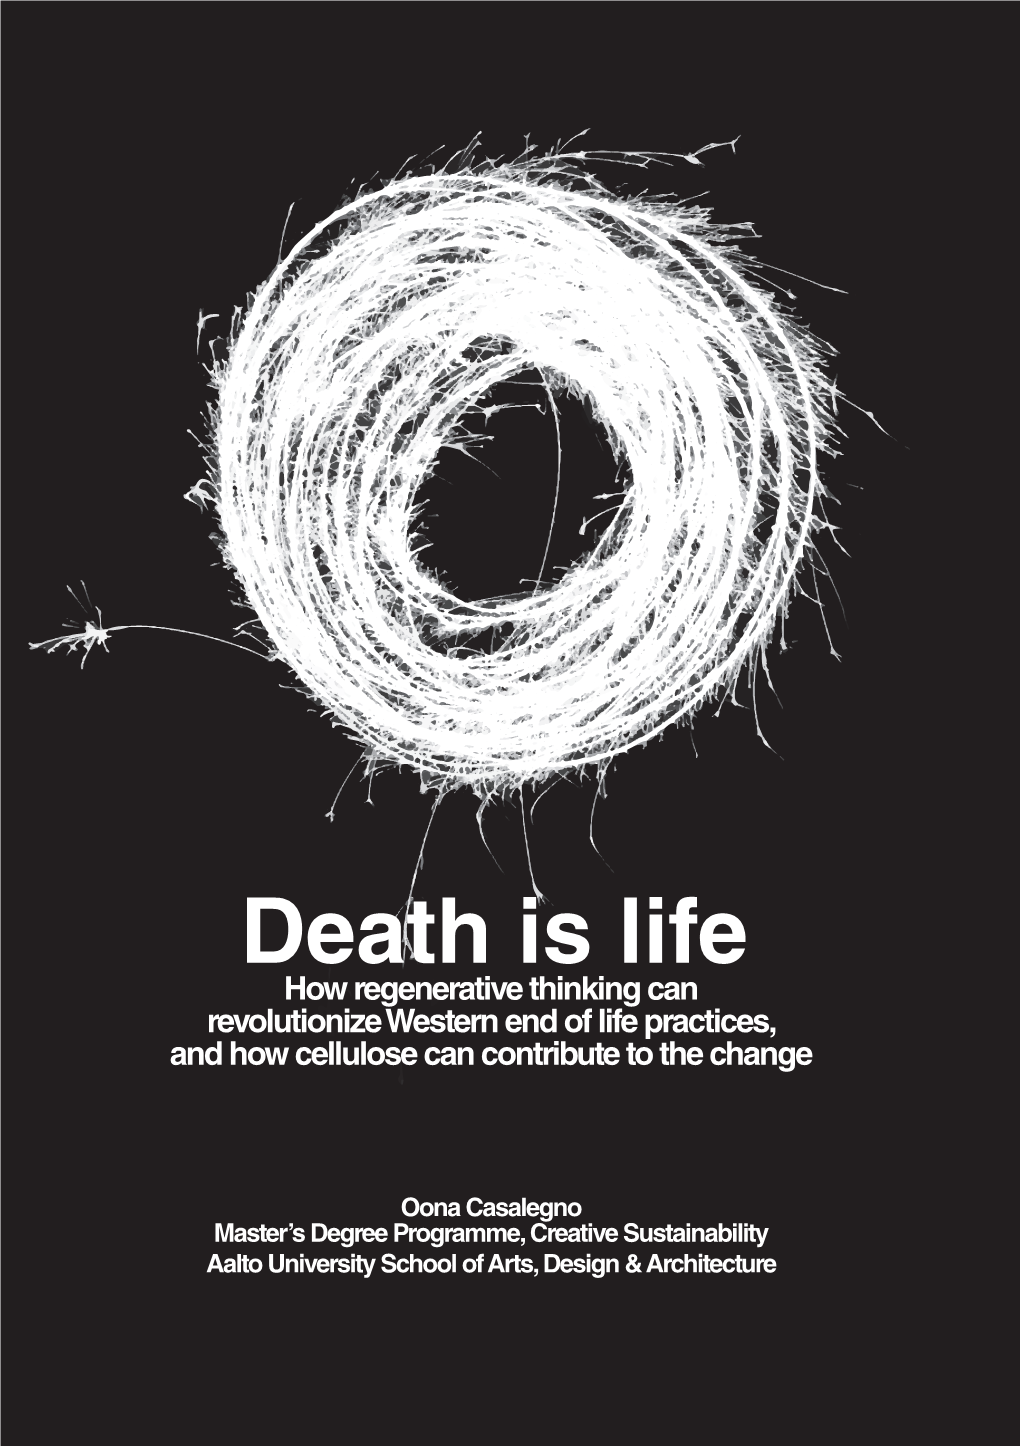 Death Is Life How Regenerative Thinking Can Revolutionize Western End of Life Practices, and How Cellulose Can Contribute to the Change